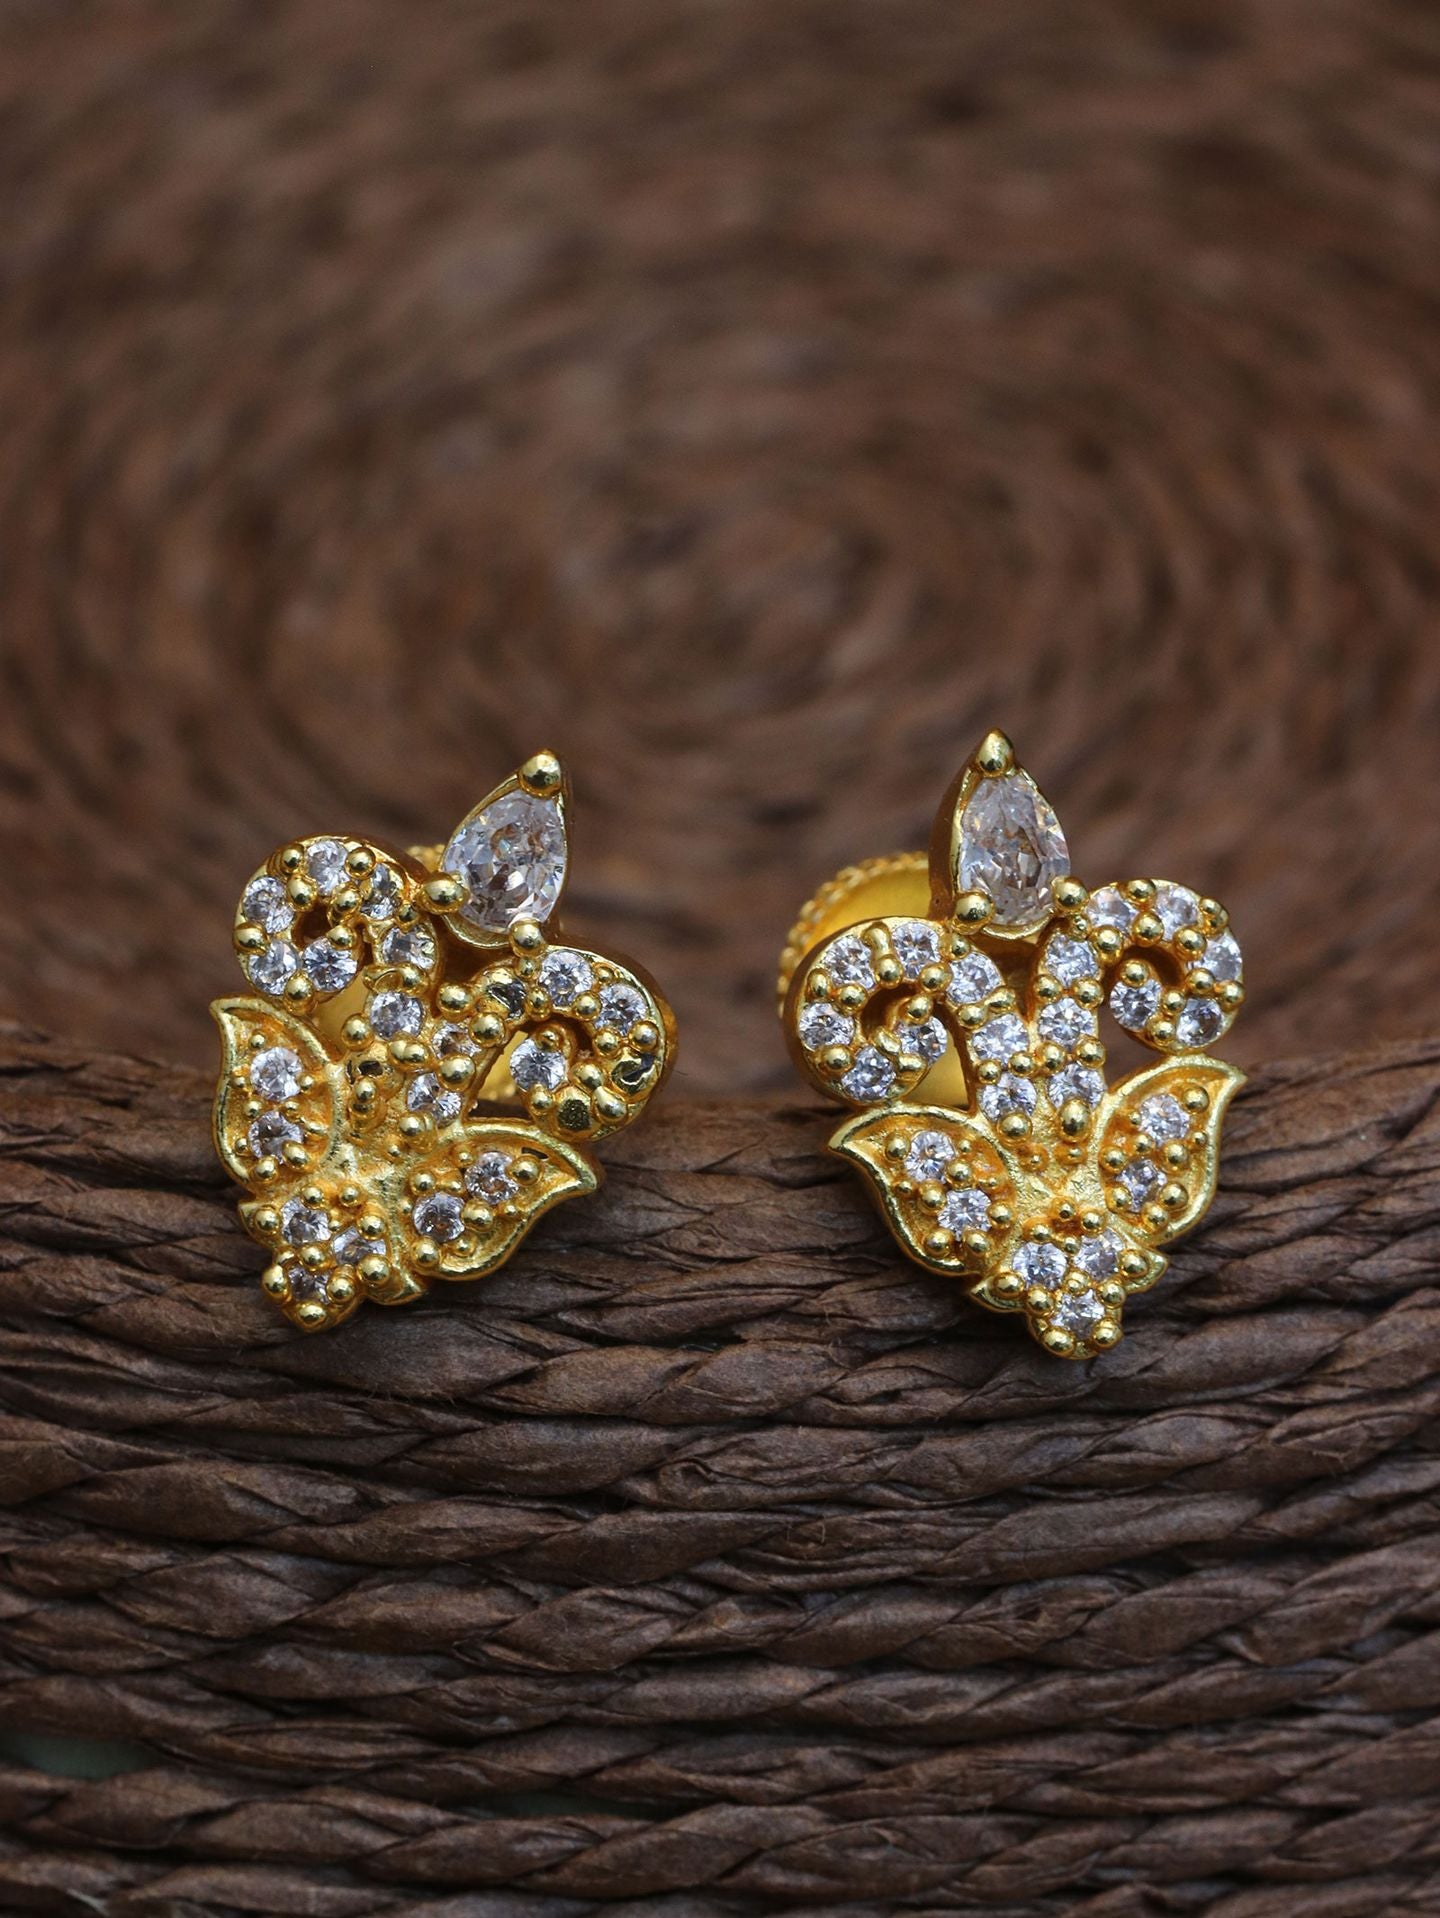 GOLD-PLATED AD STUDDED STUDS EARRINGS